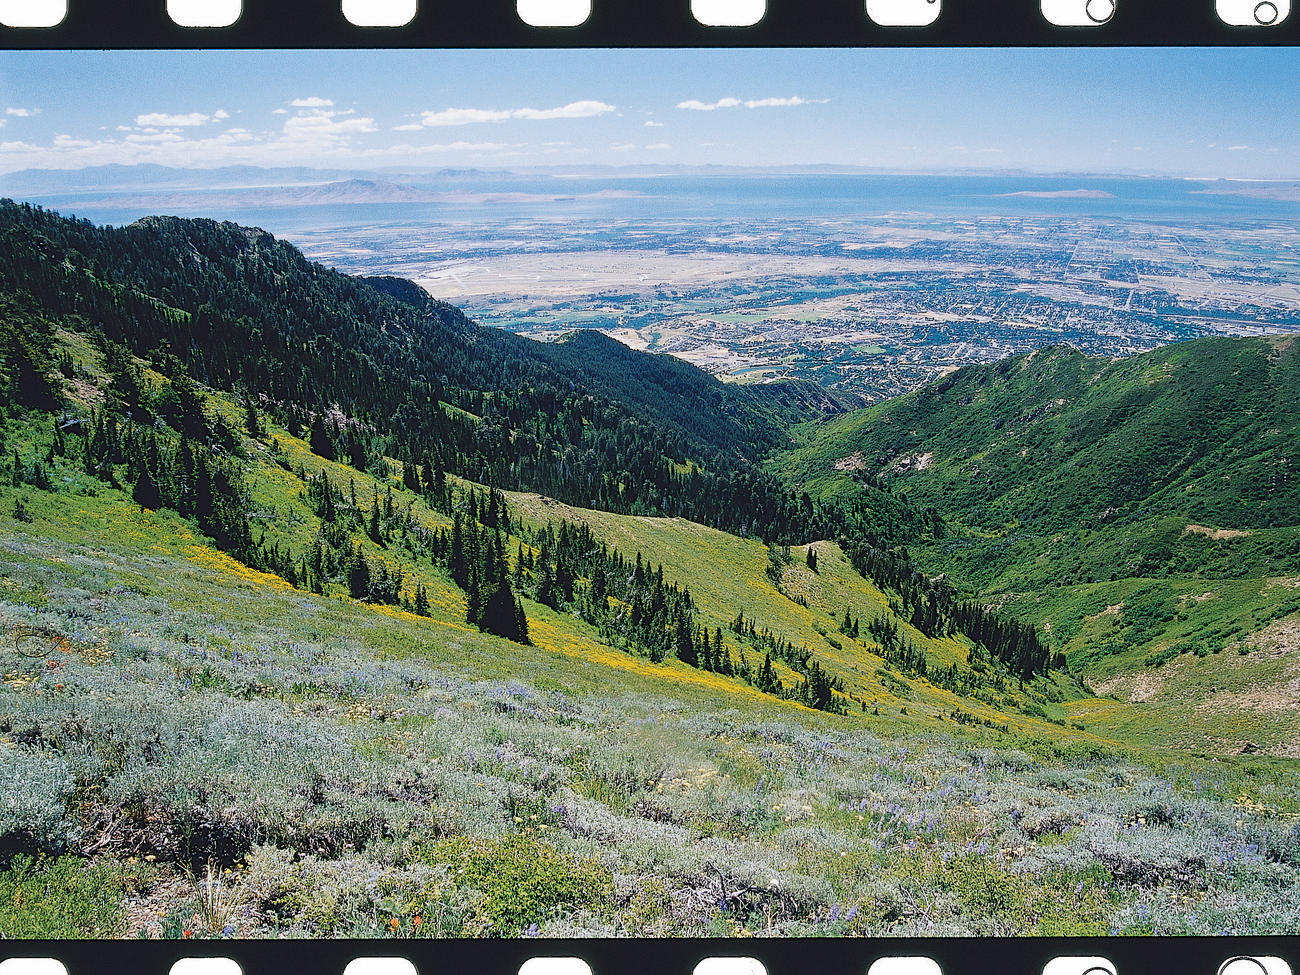 Ogden, Utah: Best Access to the Outdoors